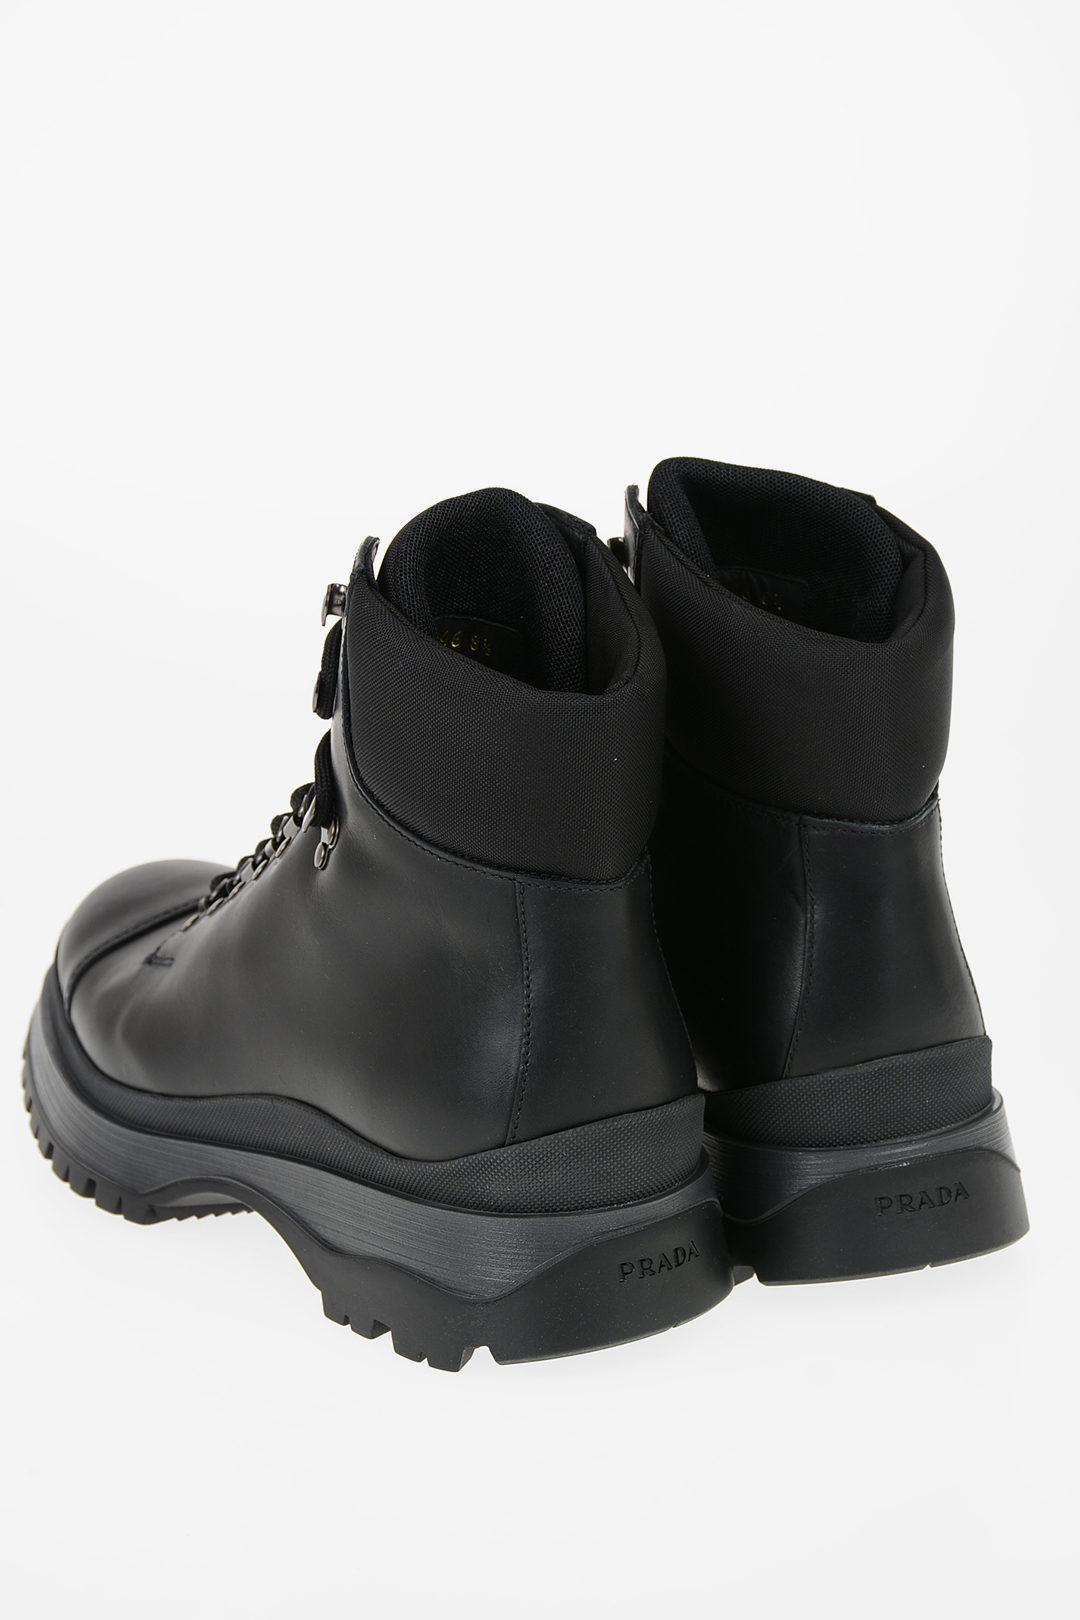 Prada leather Hiking boots men - Glamood Outlet